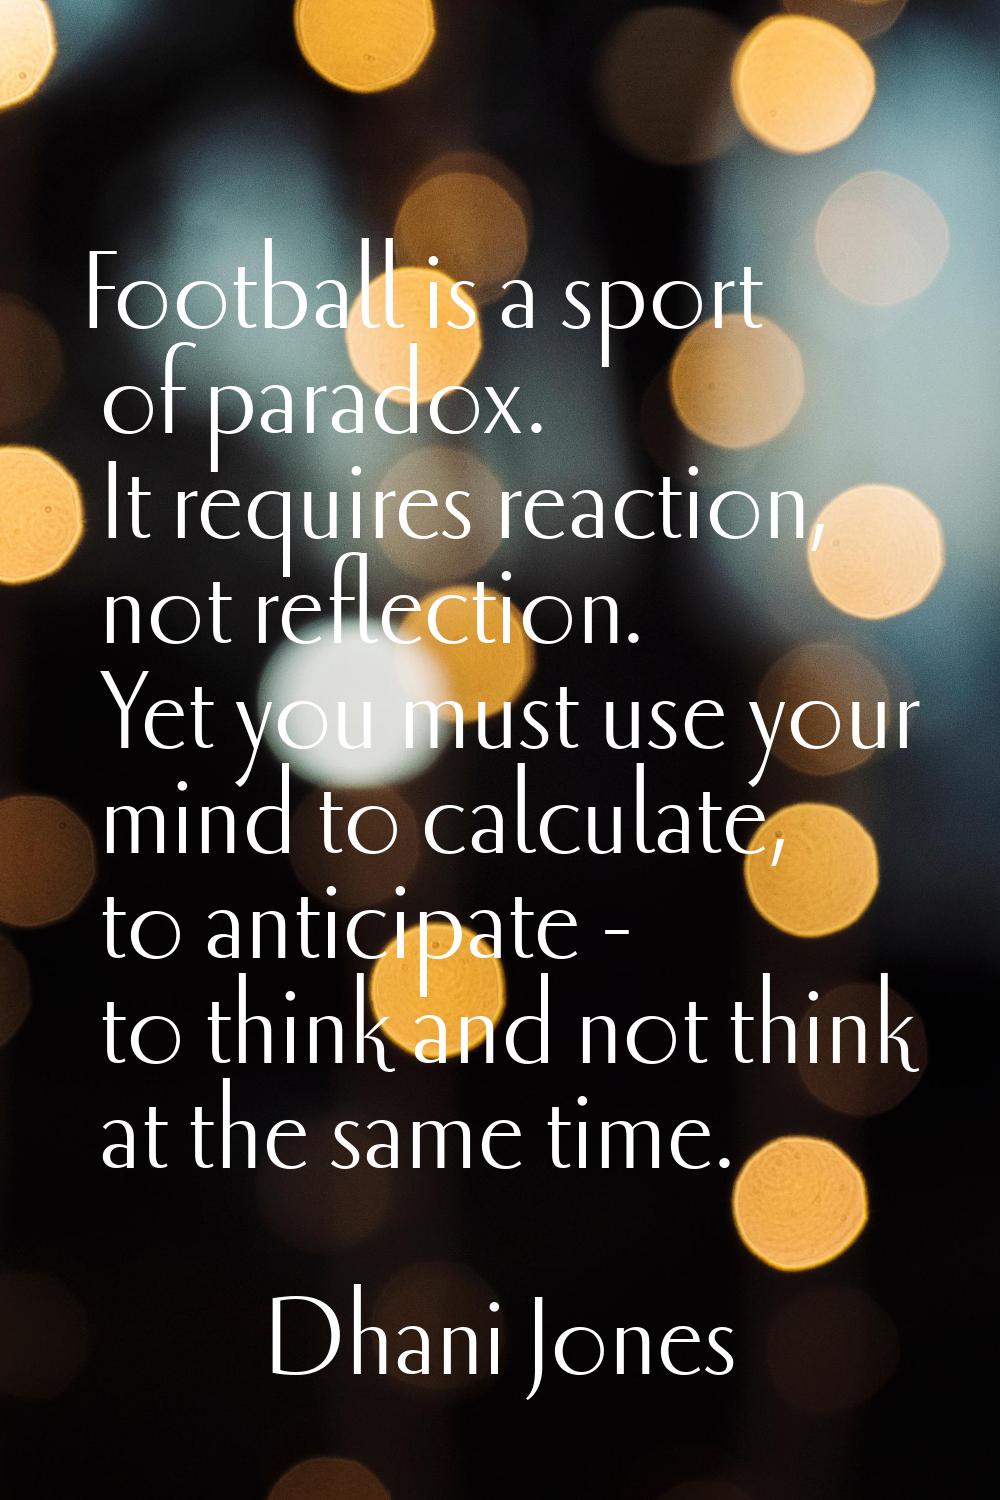 Football is a sport of paradox. It requires reaction, not reflection. Yet you must use your mind to